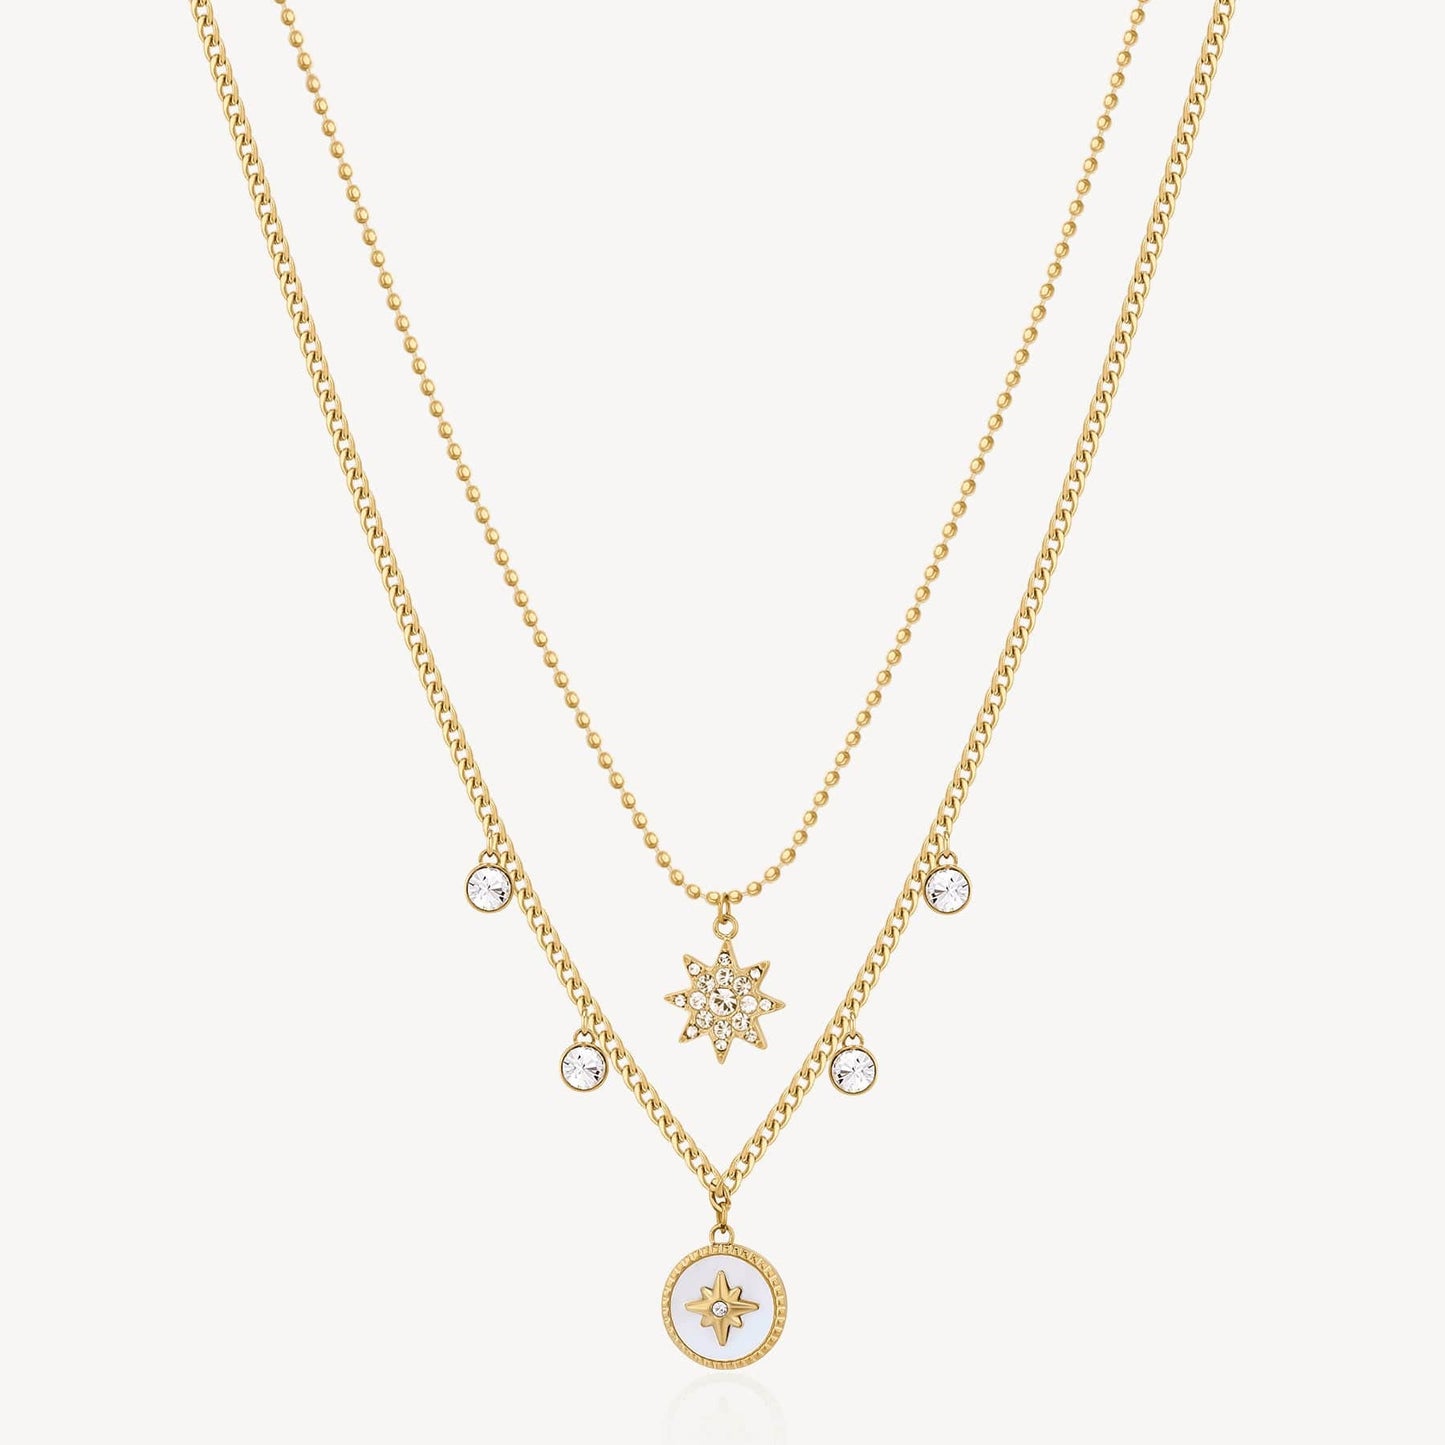 NKL-SS Stainless Steel Gold Tone Chakra Necklace - Star